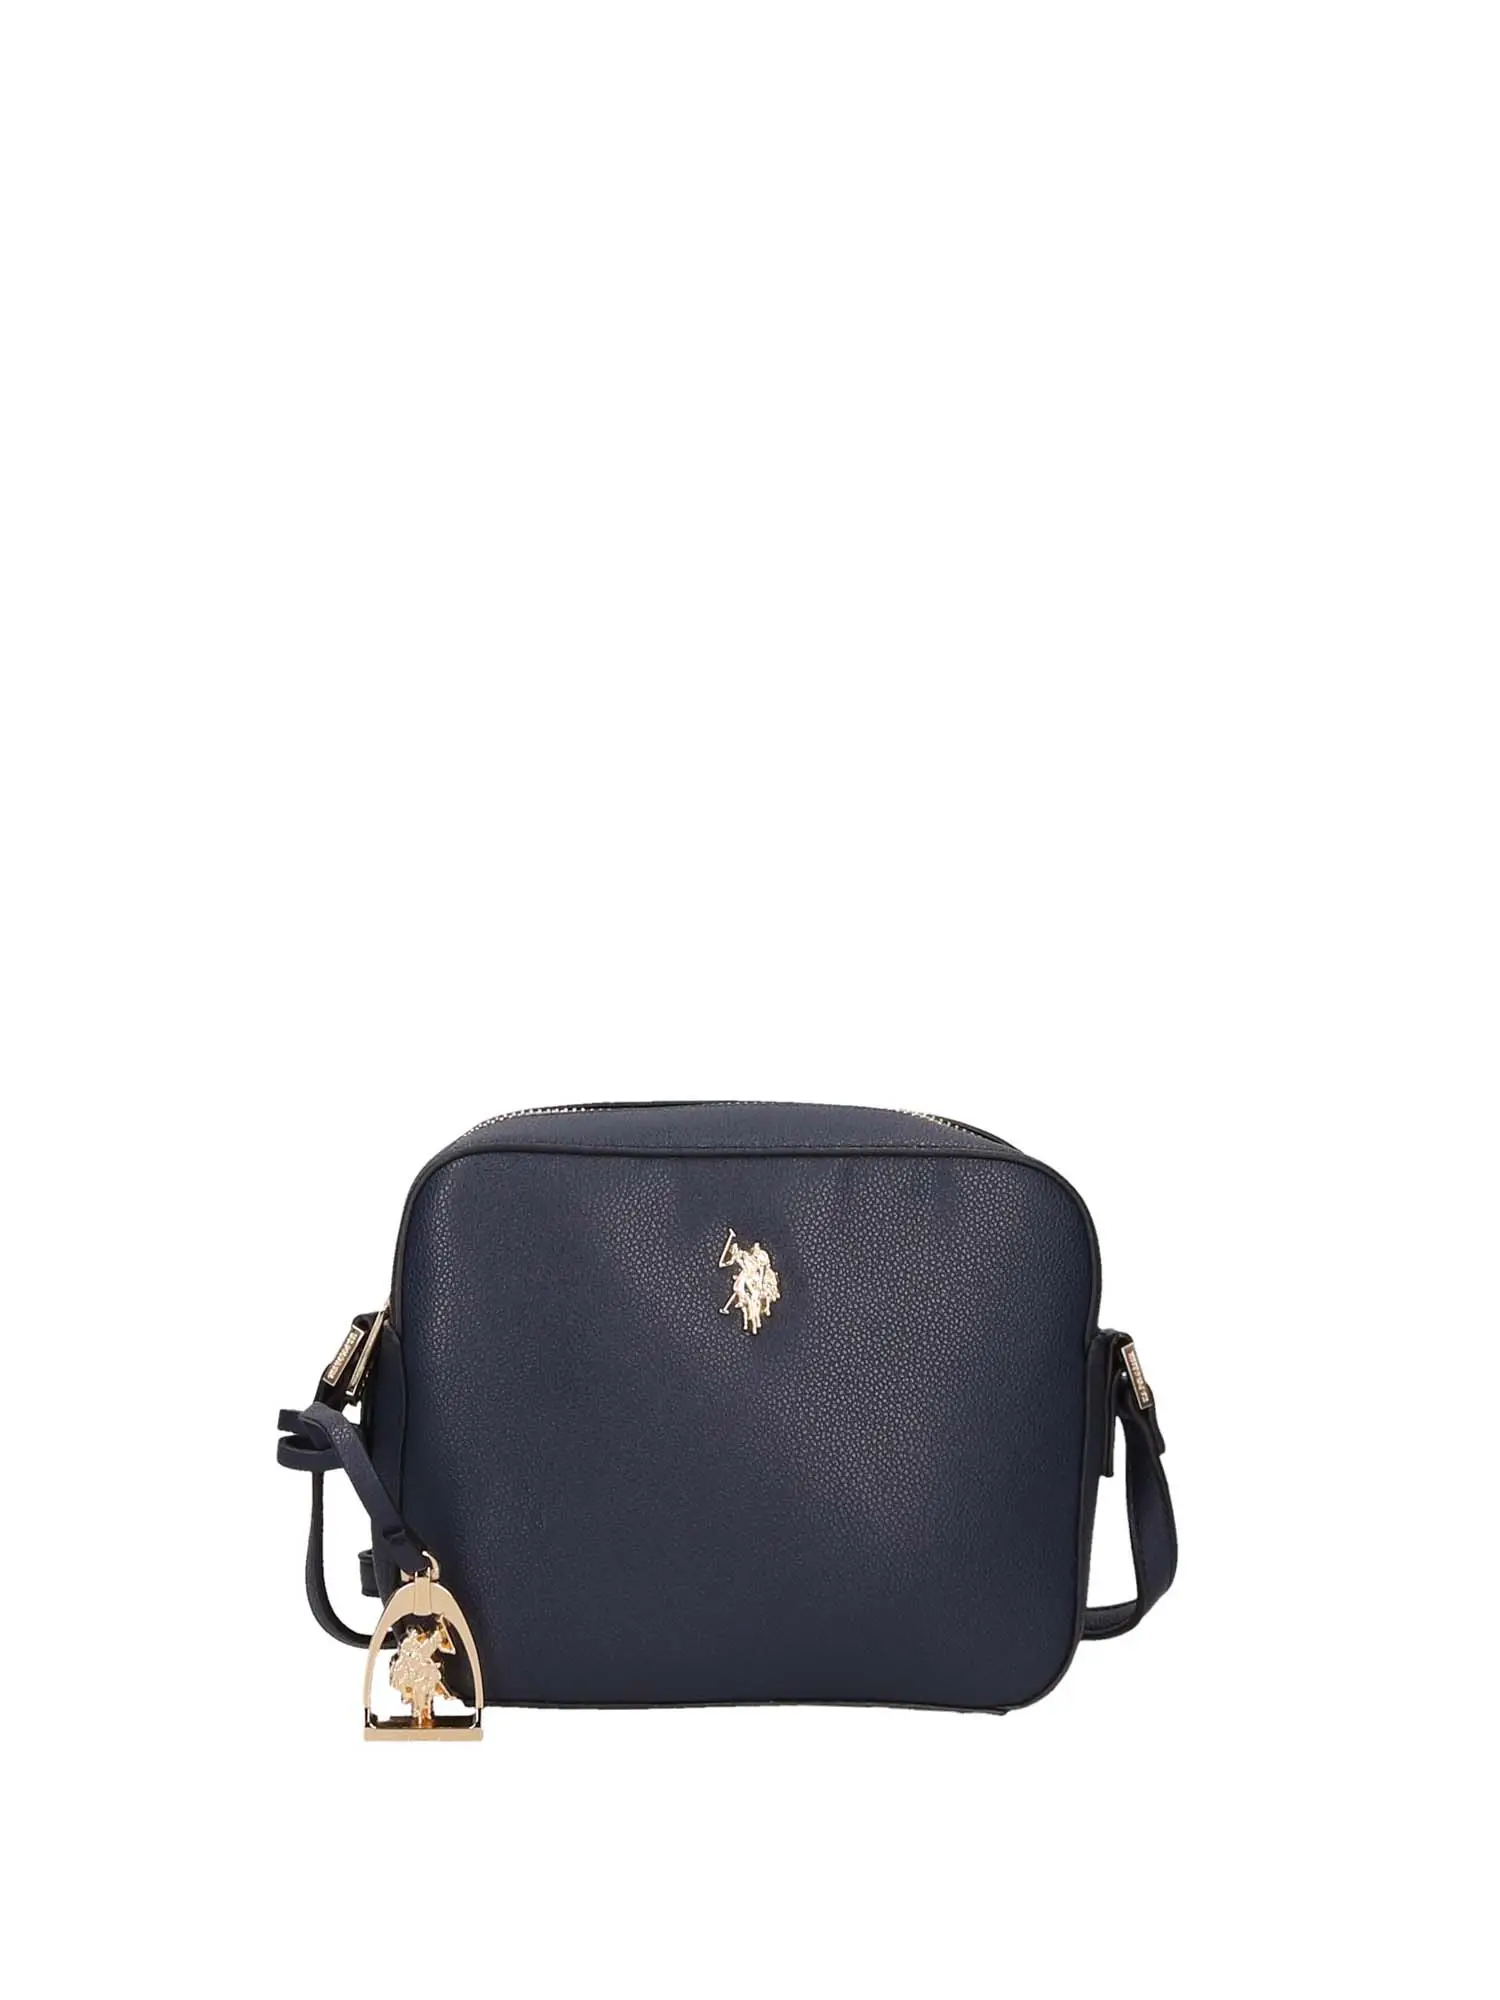 TRACOLLA DONNA - US POLO ASSN. - BIUJE6312WVP - NAVY, UNICA